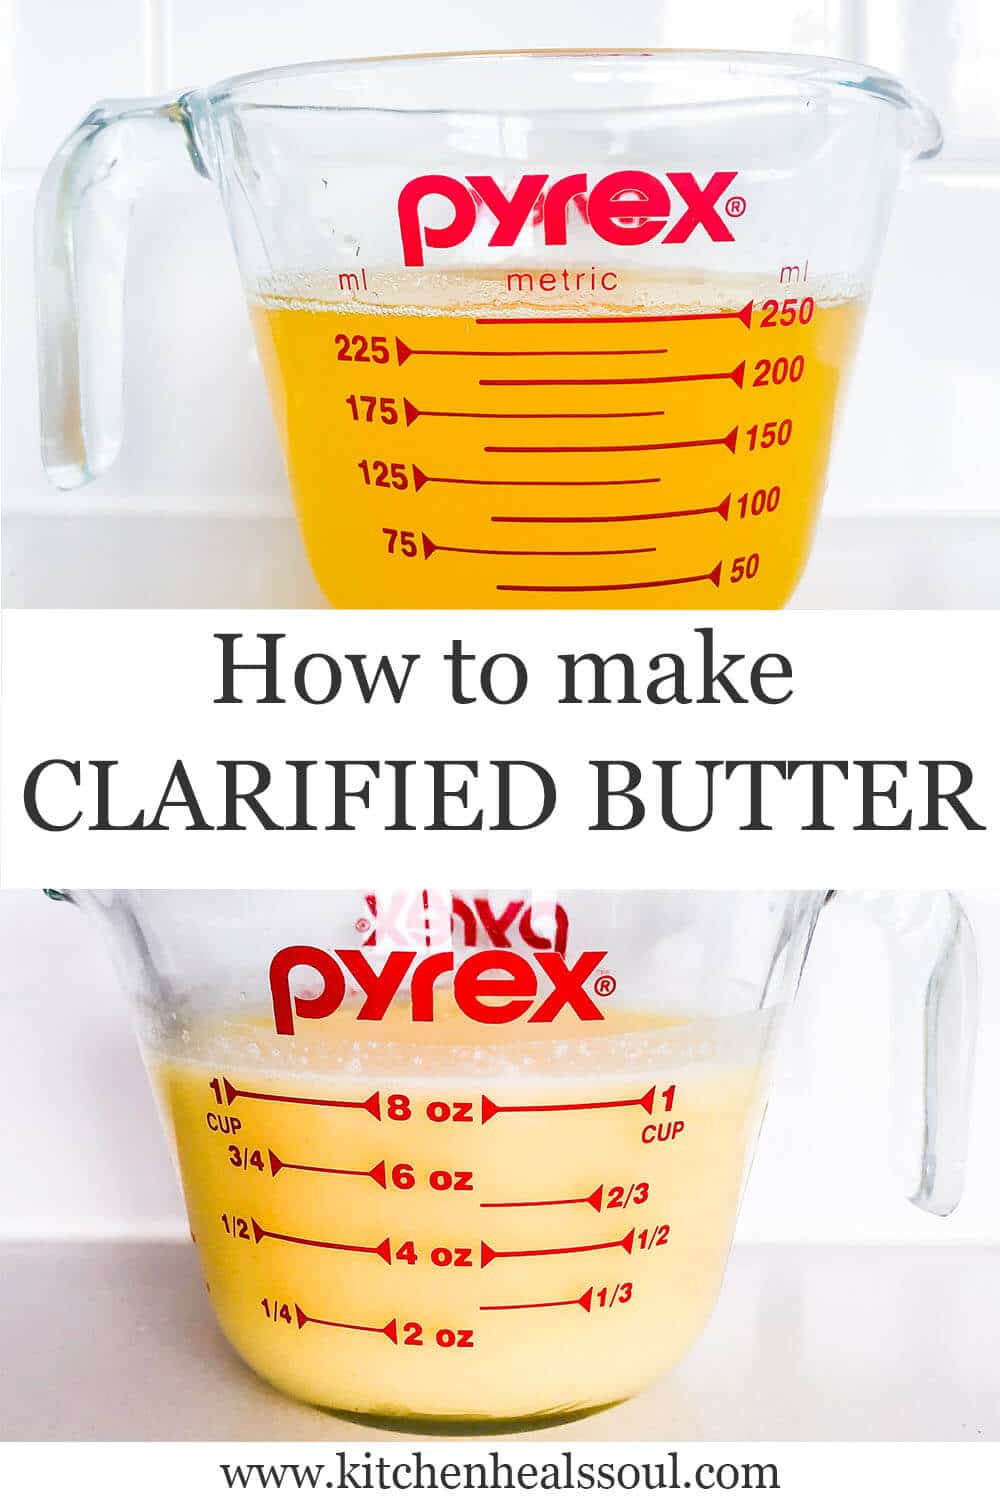 Pyrex measuring cups filled with liquid clarified butter (golden) and solid clarified butter (opaque).